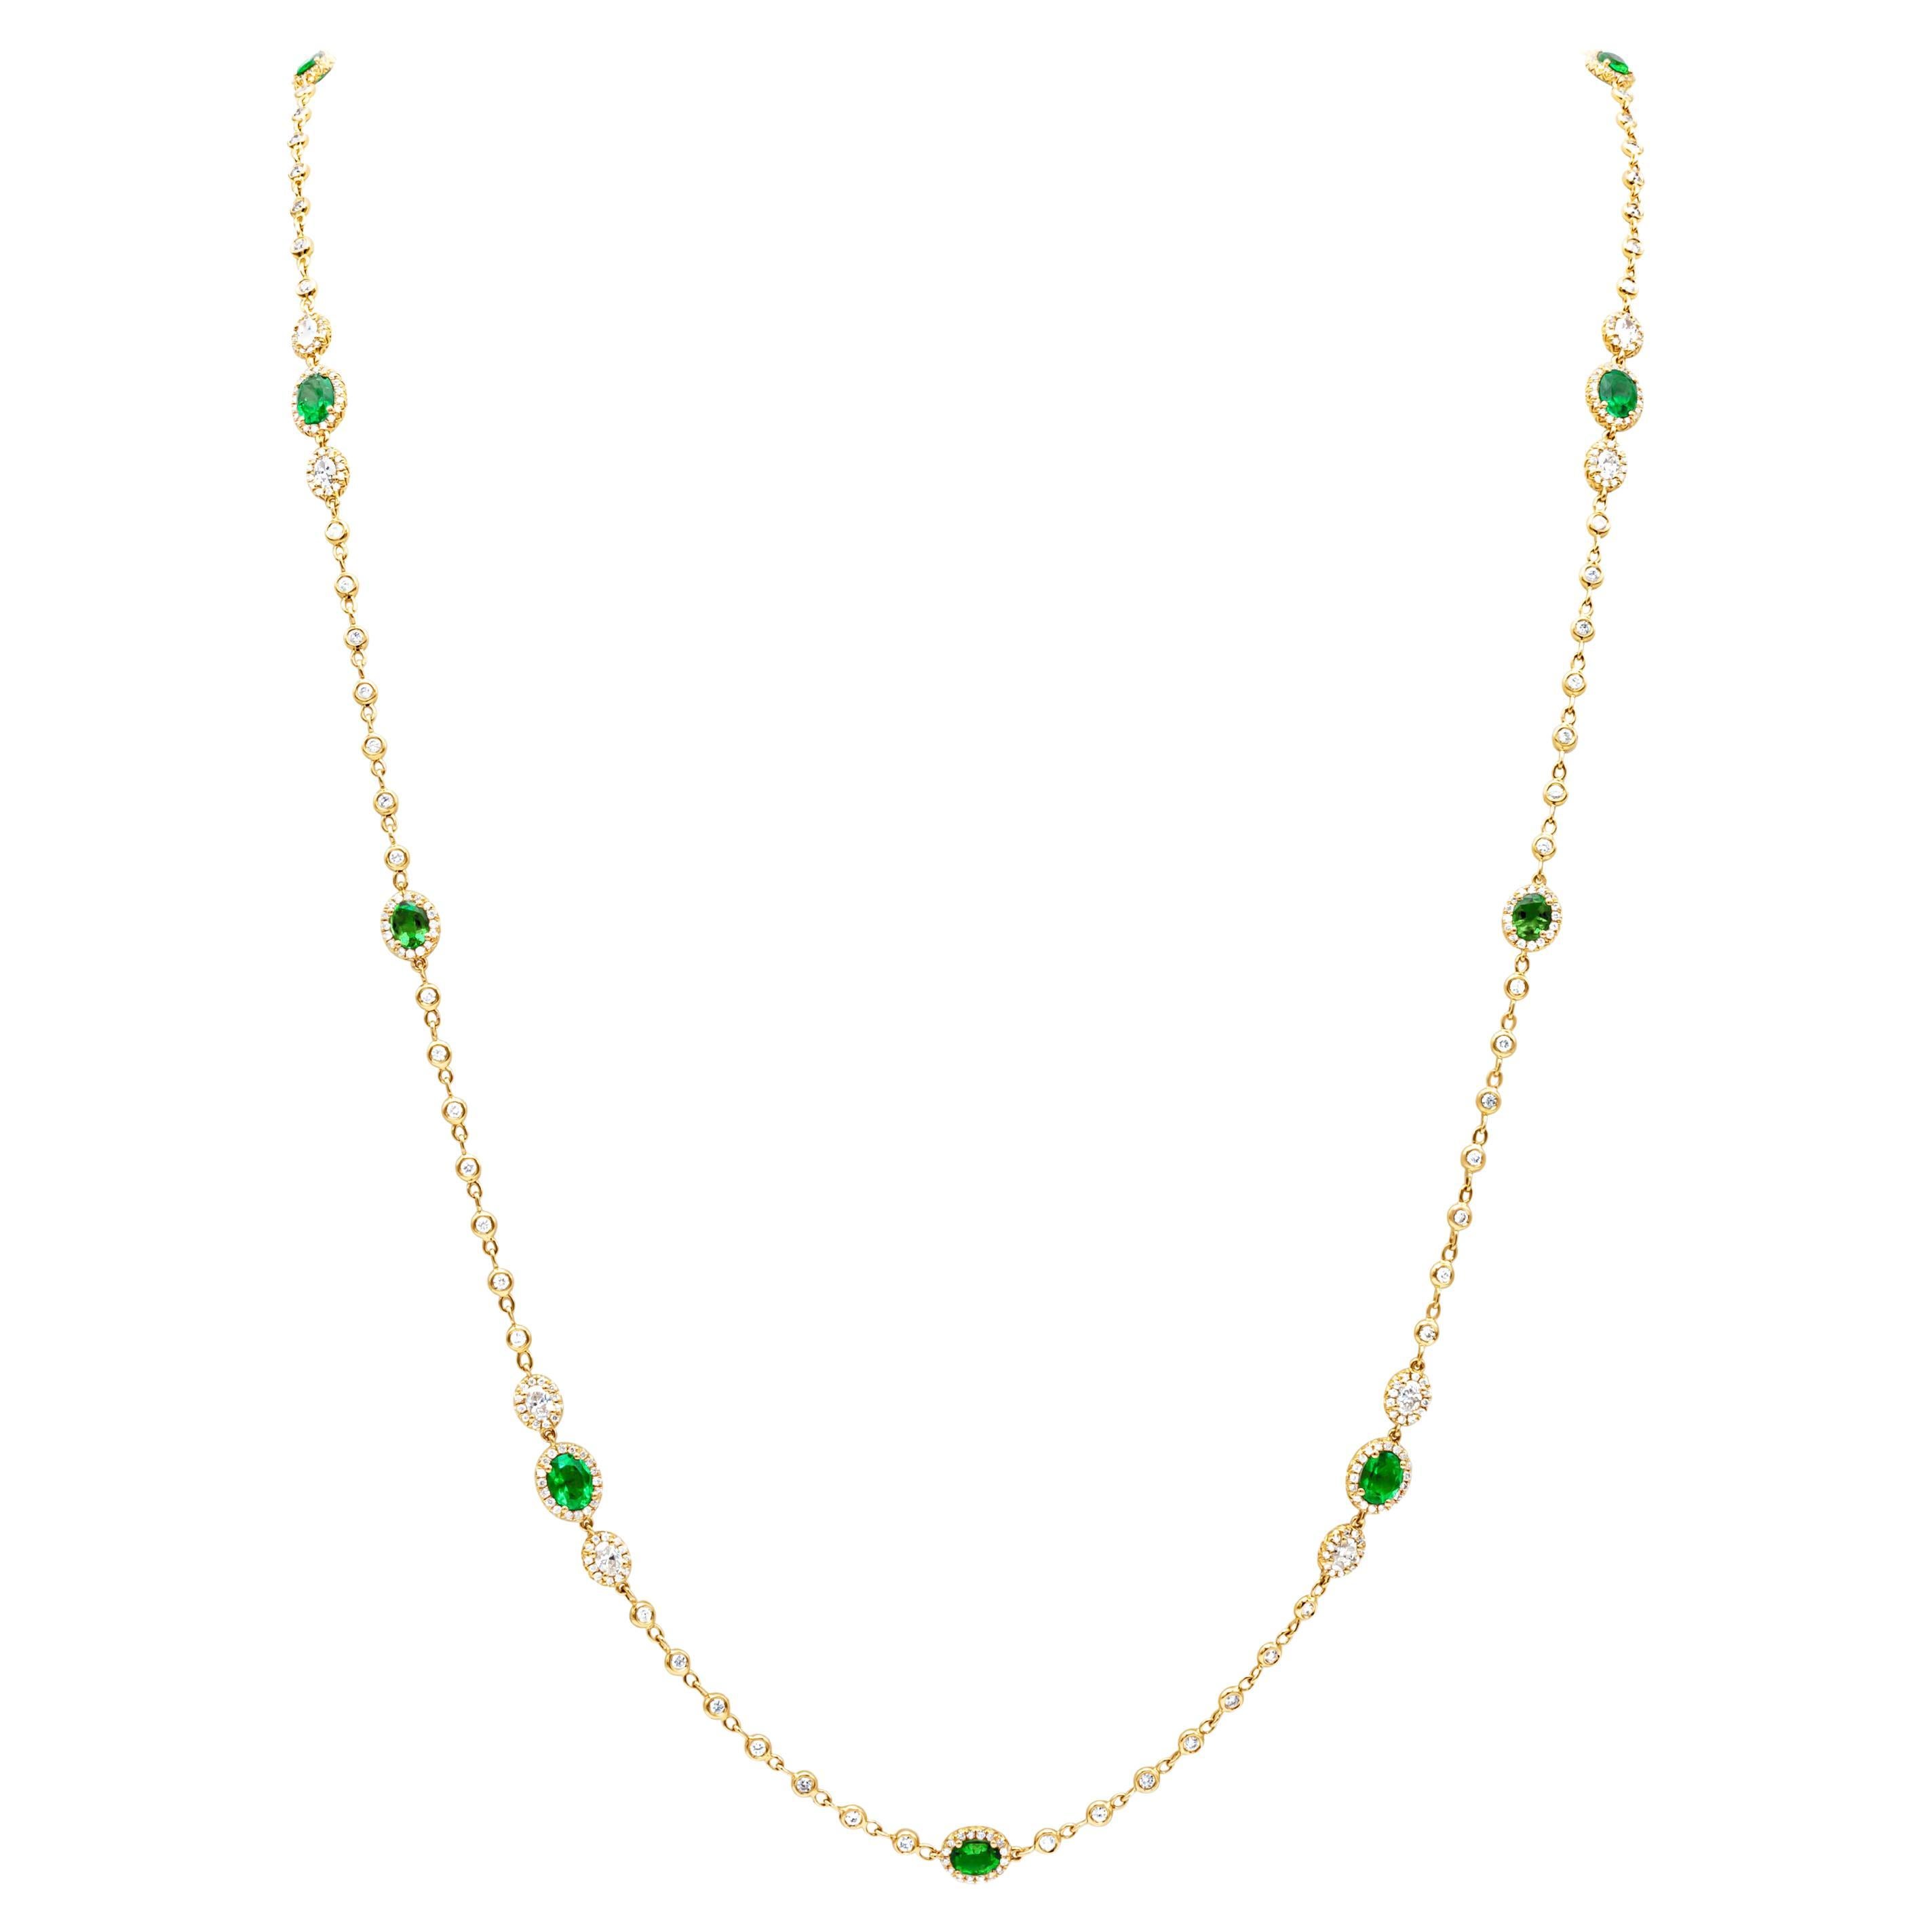 7.70 Carats Total Oval Cut Colombian Emerald & Diamond By the Yard Necklace